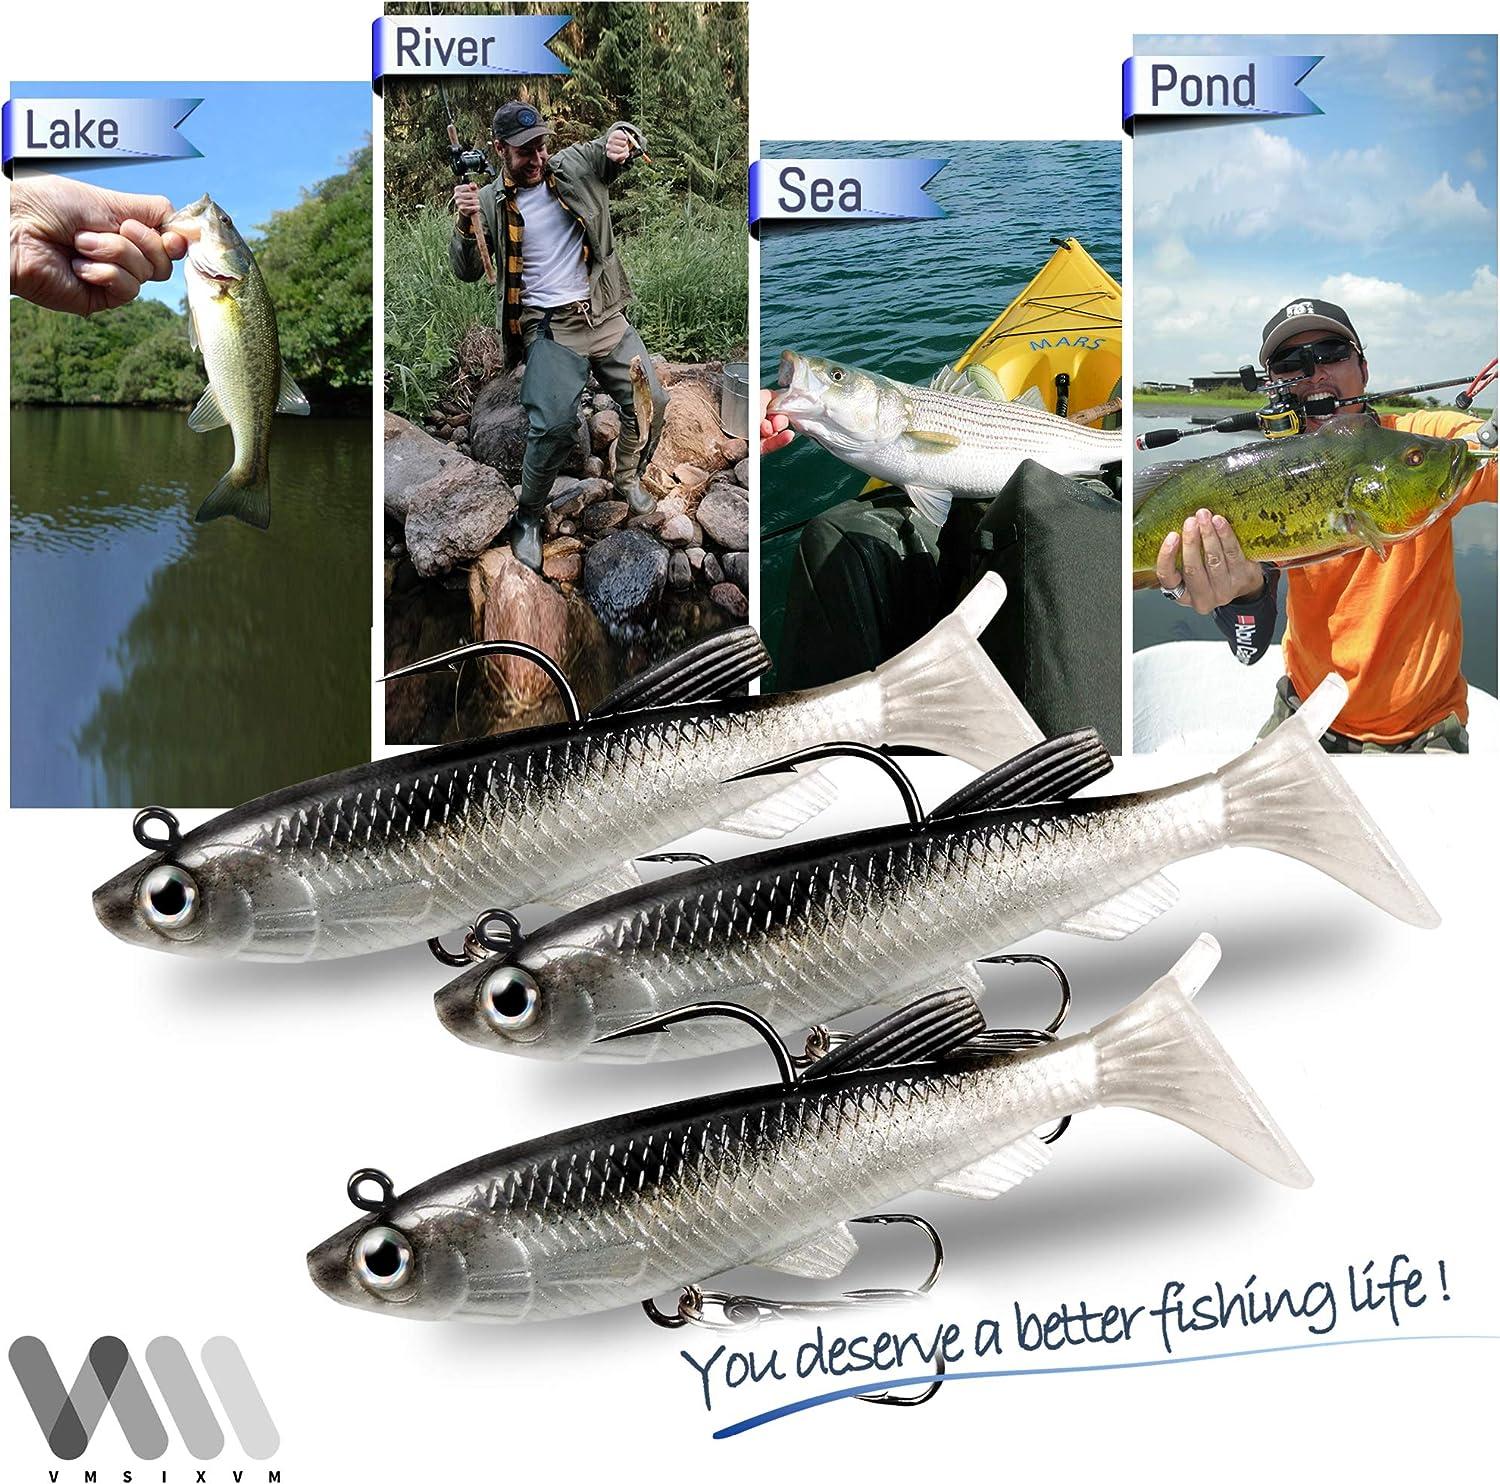 Realistic Fishing Lure Swimbaits for Bass Long-lasting Lures